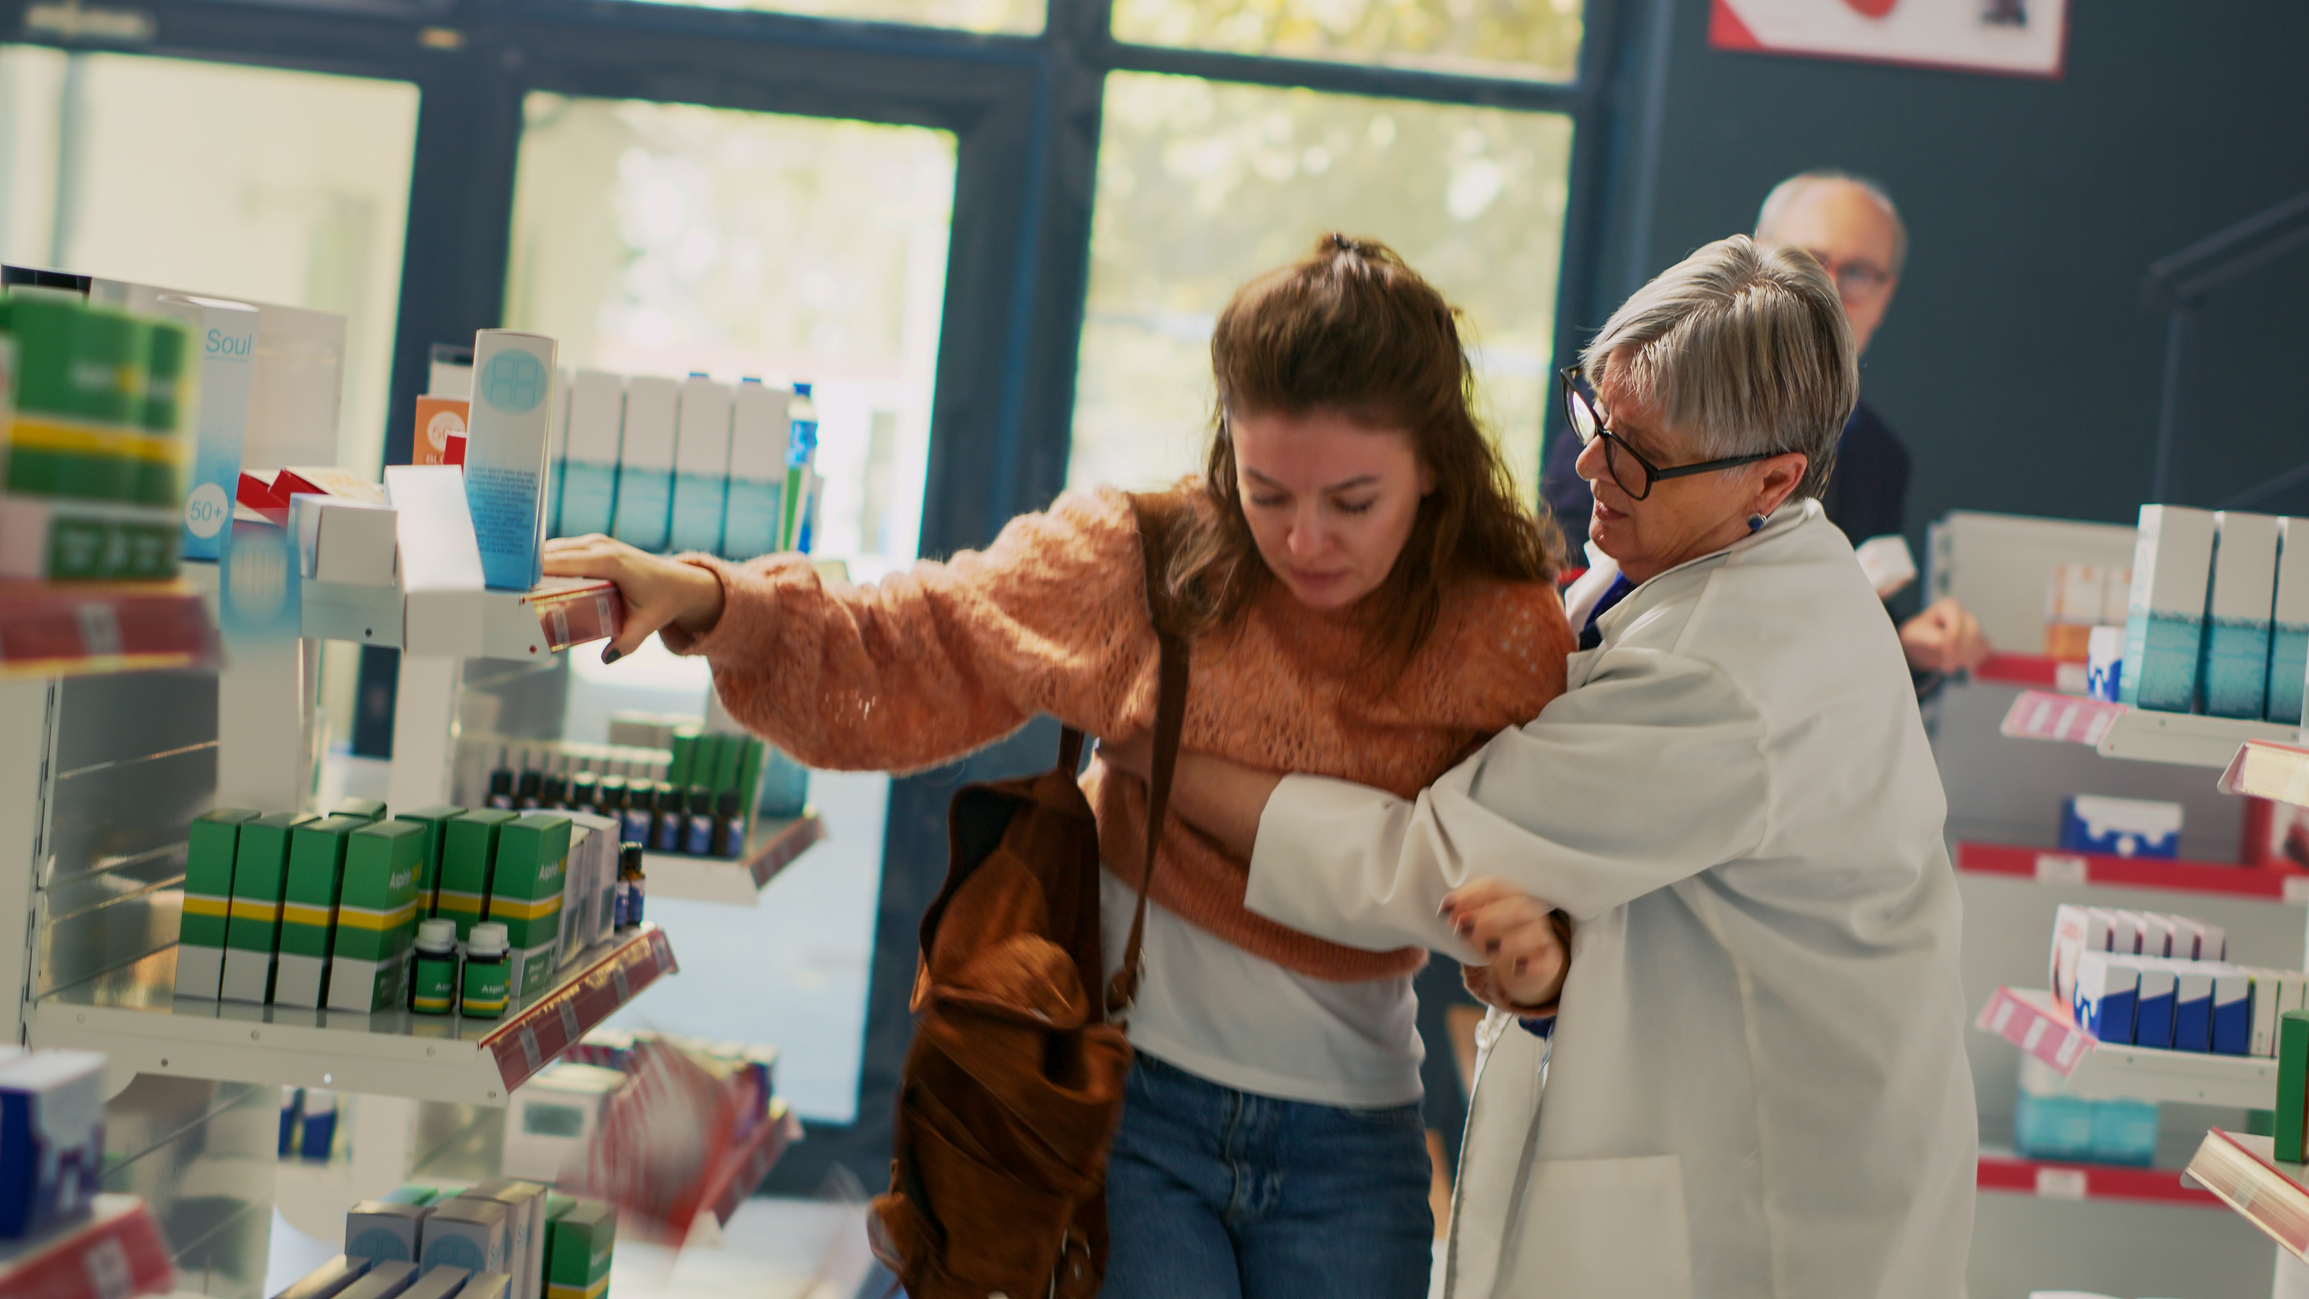 A concerned female pharmacist with short white hair recognizes early stroke symptoms when she holds a young white woman in an orange sweater to keep her from falling